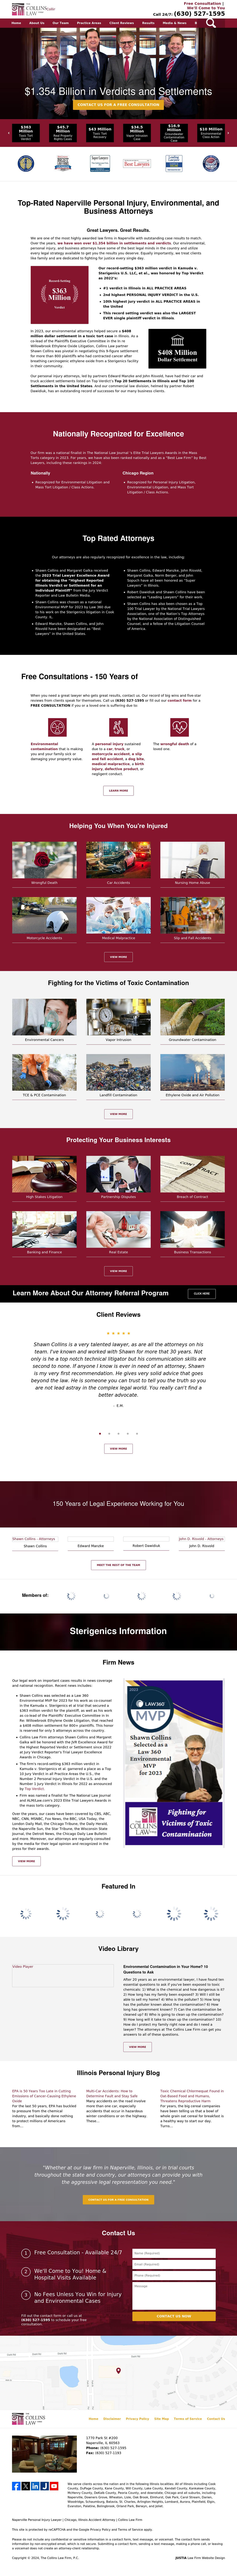 The Collins Law Firm, P.C. - Naperville IL Lawyers